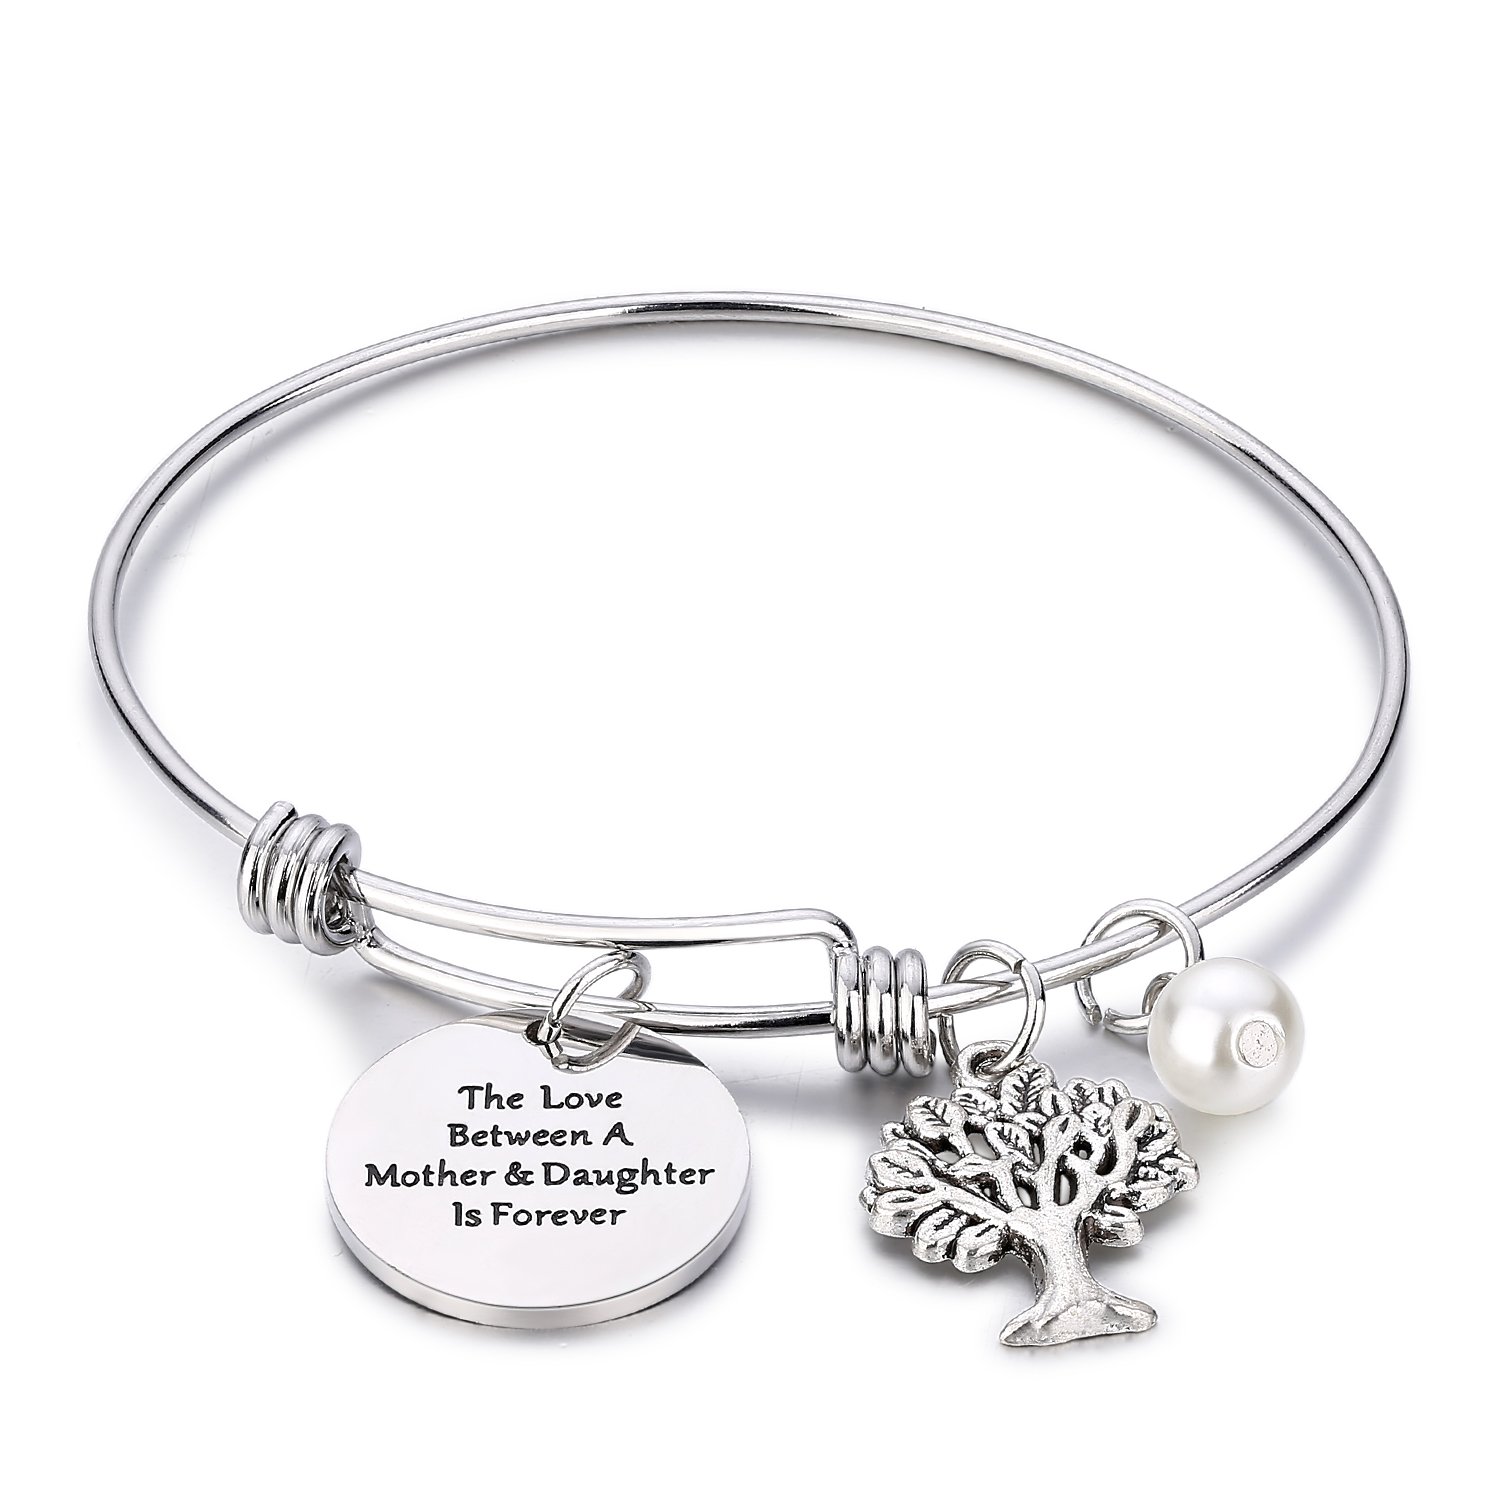 CJ&M Family Tree Bracelet The Love Between Mother and Daughter Is Forever Tree of Life Bracelet Mother Gift Bangle, Christmas Gifts,Mother's Day Gifts